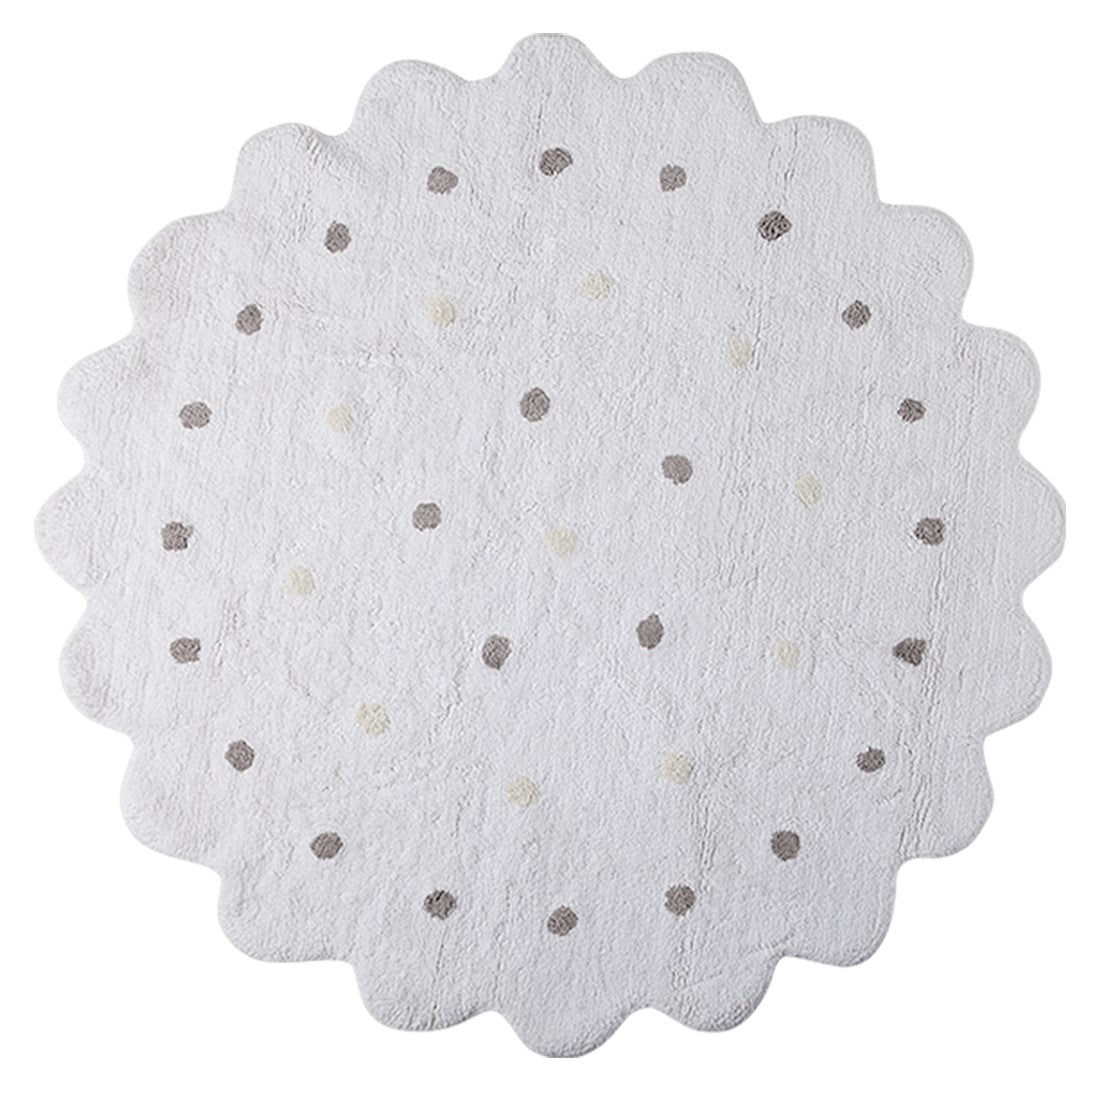 Circular white rug with scalloped edge and grey and white polka dot design